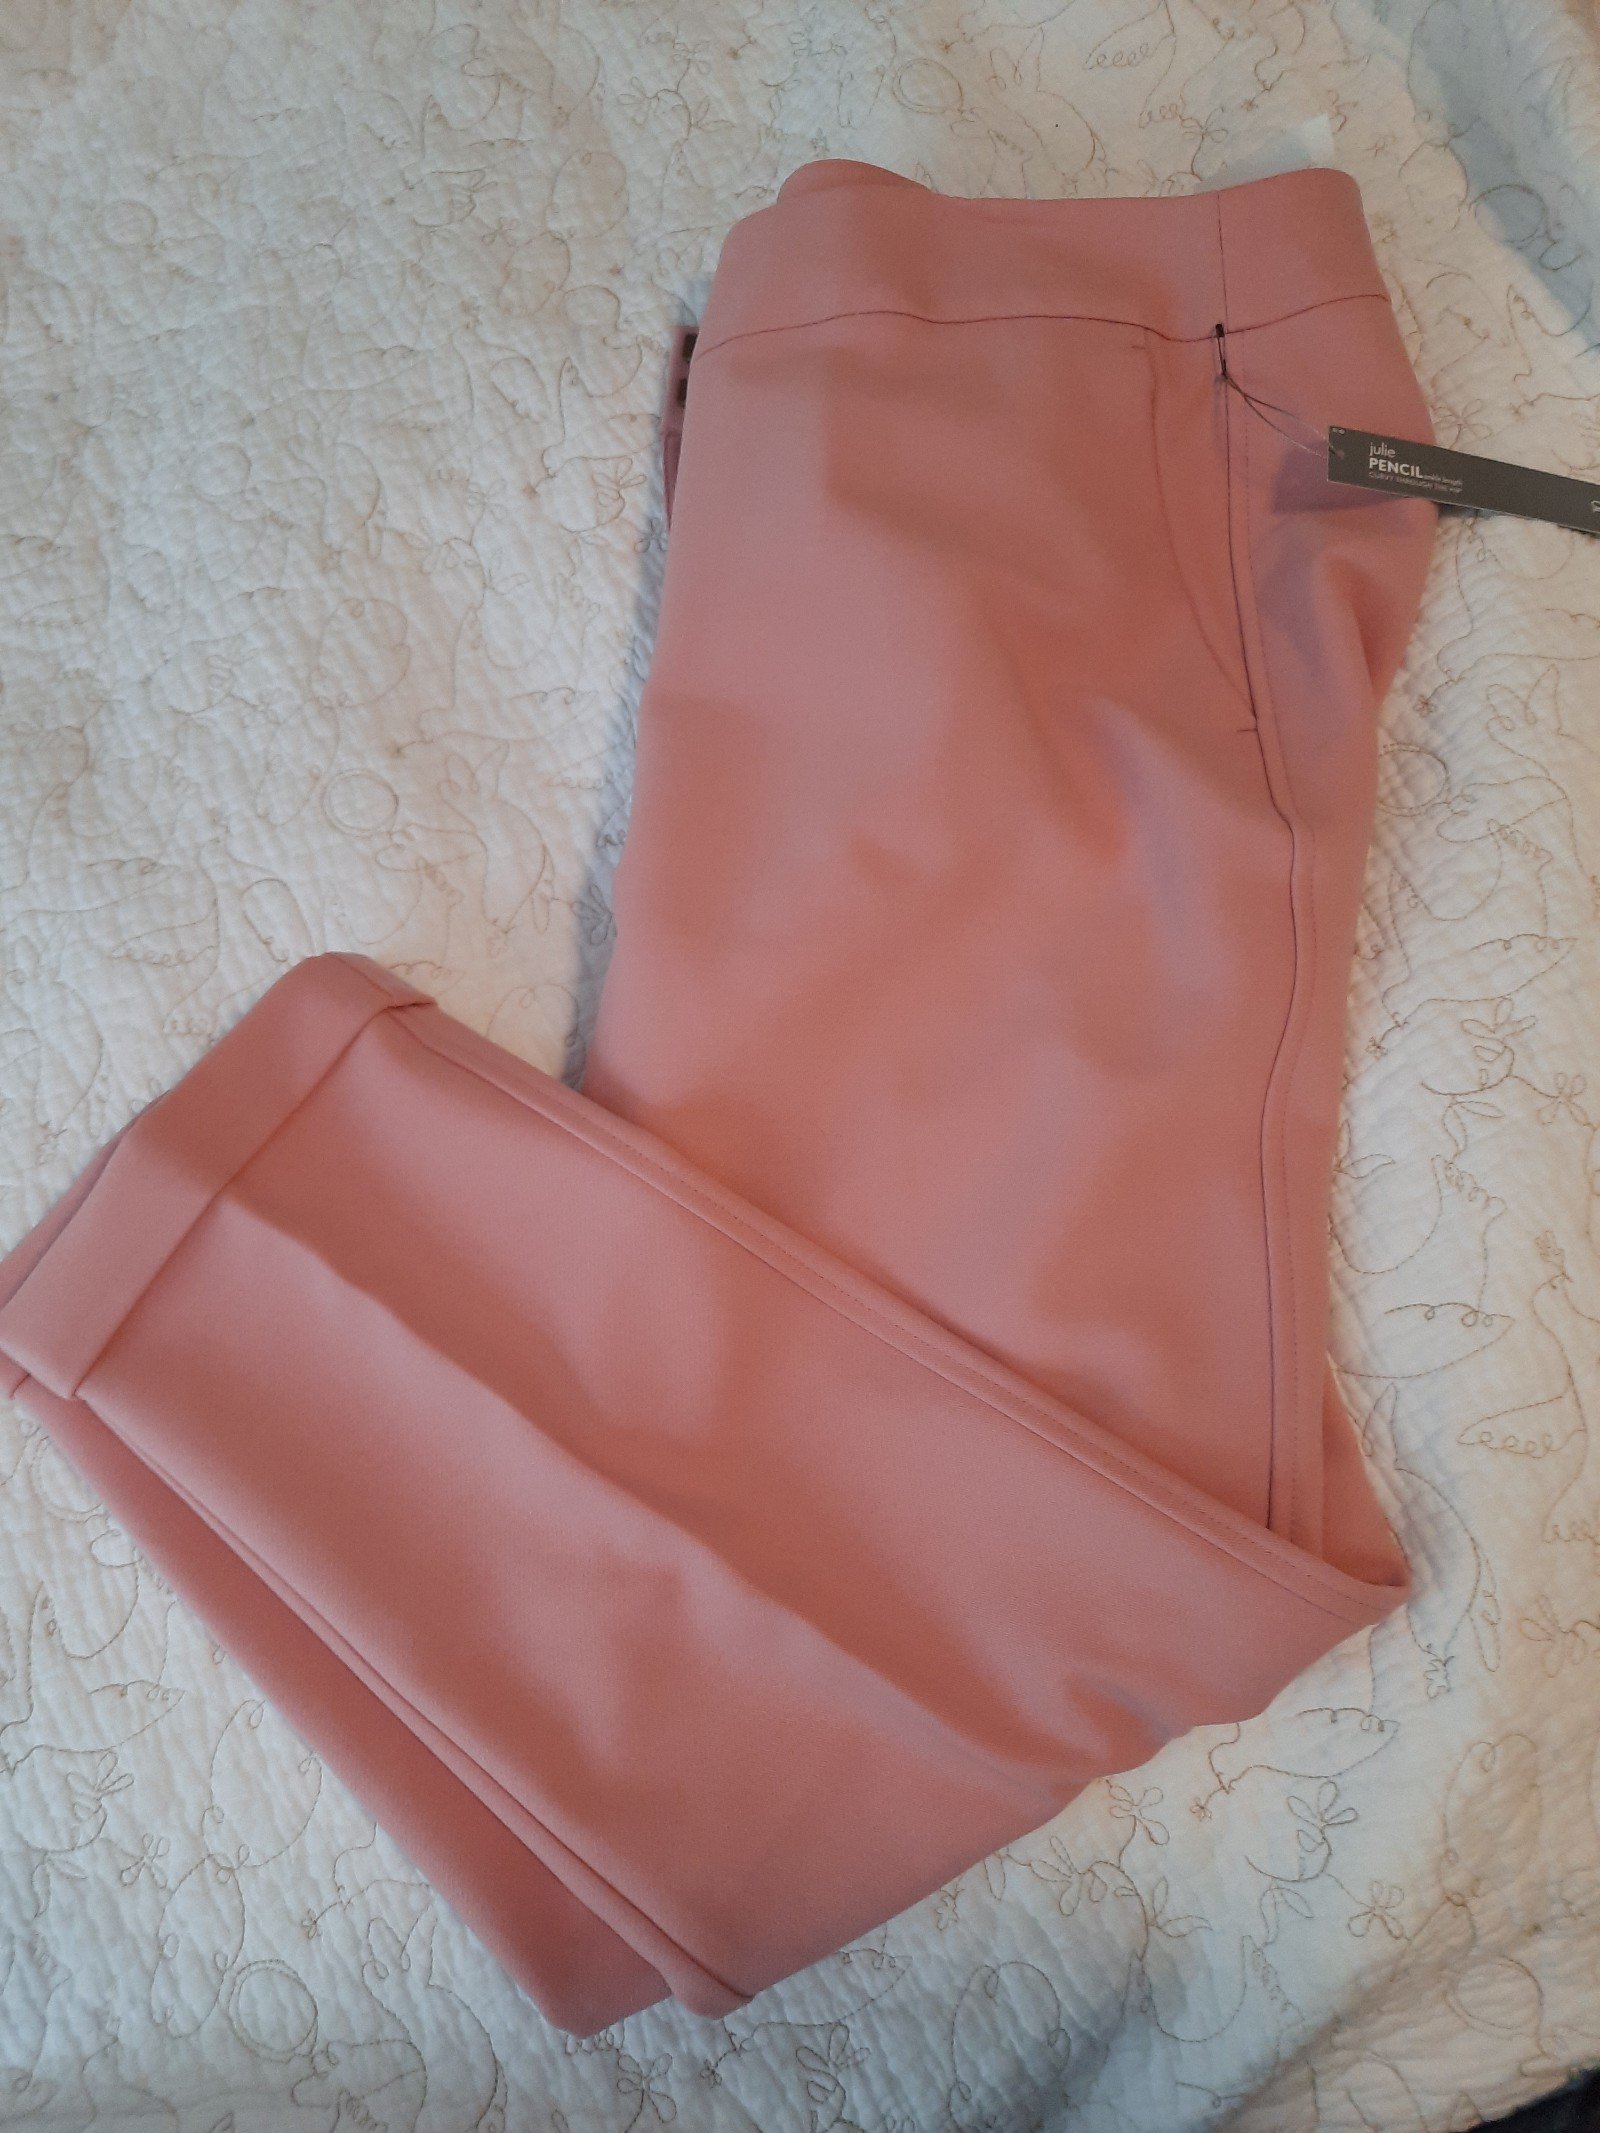 save up to 70% Pink Dress Pants hb4DpWAen well sale